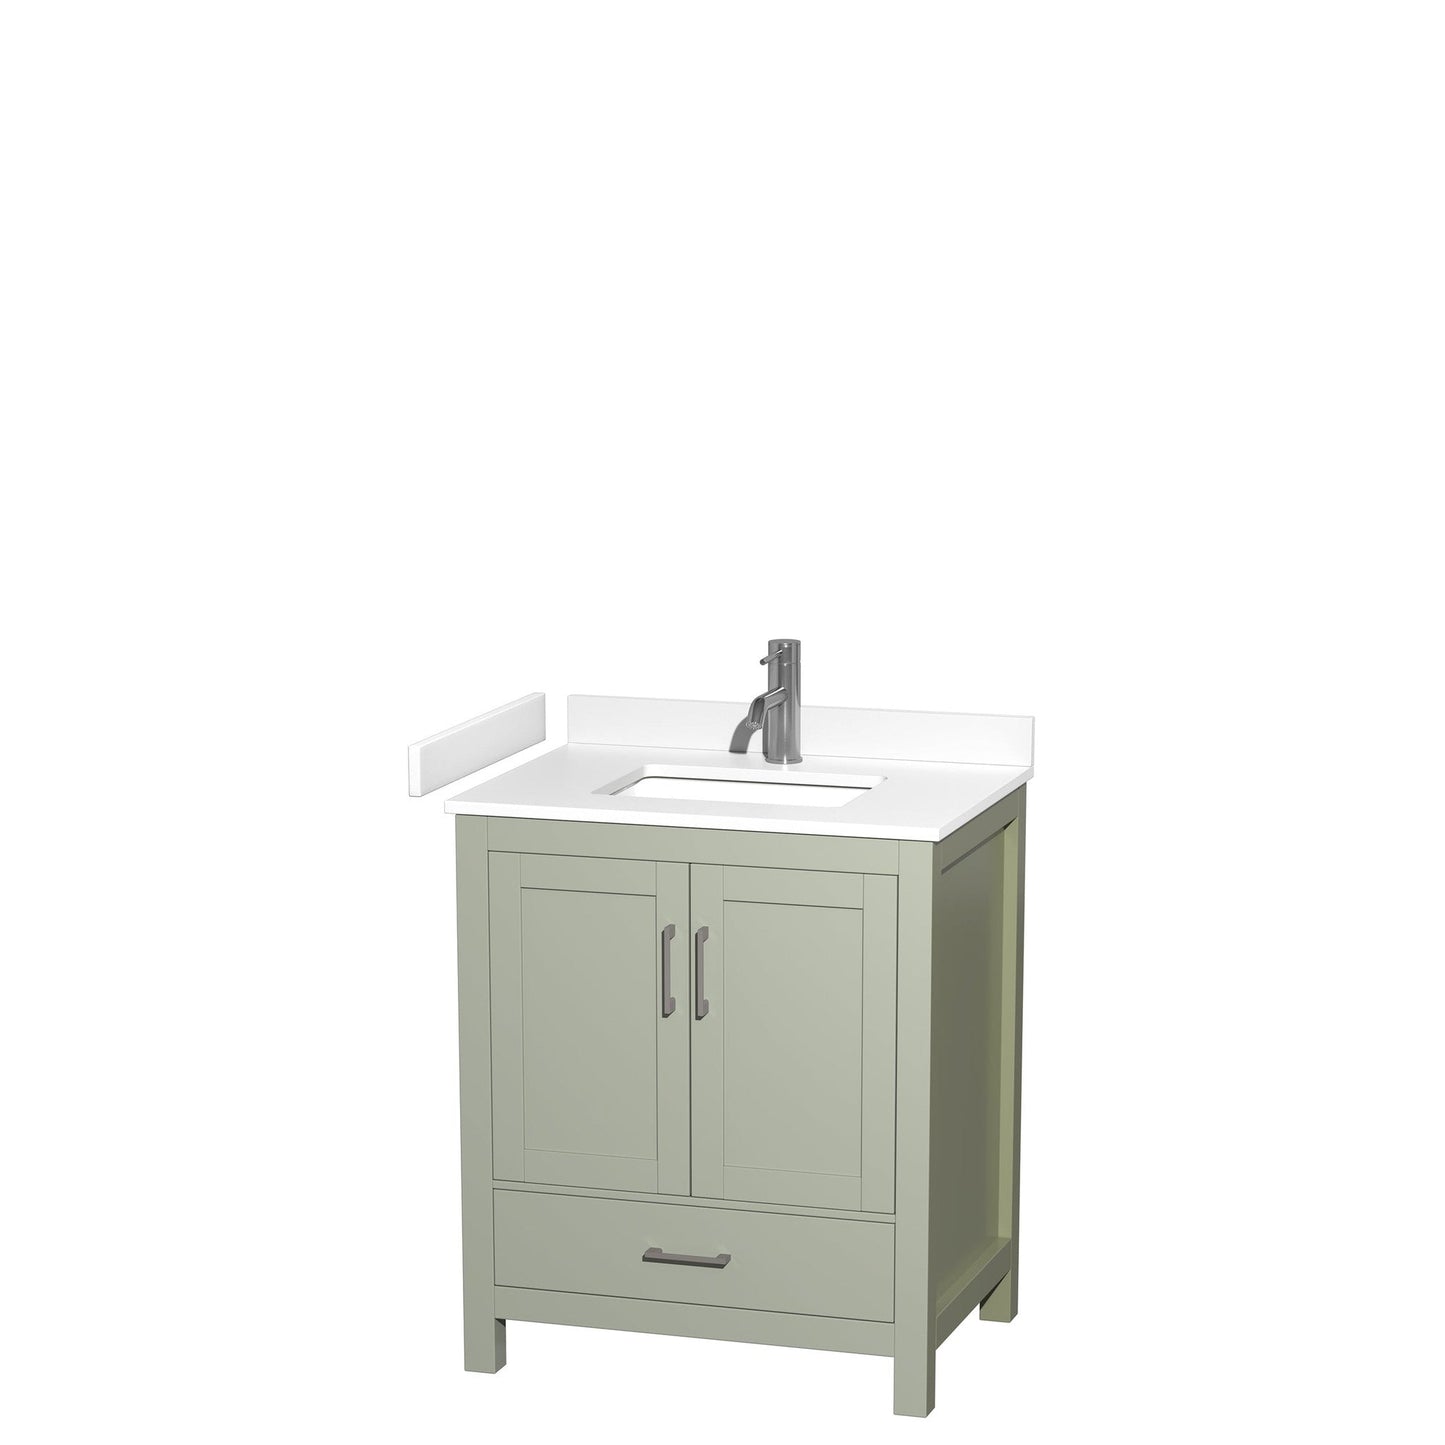 Sheffield 30" Single Bathroom Vanity in Light Green, White Cultured Marble Countertop, Undermount Square Sink, Brushed Nickel Trim